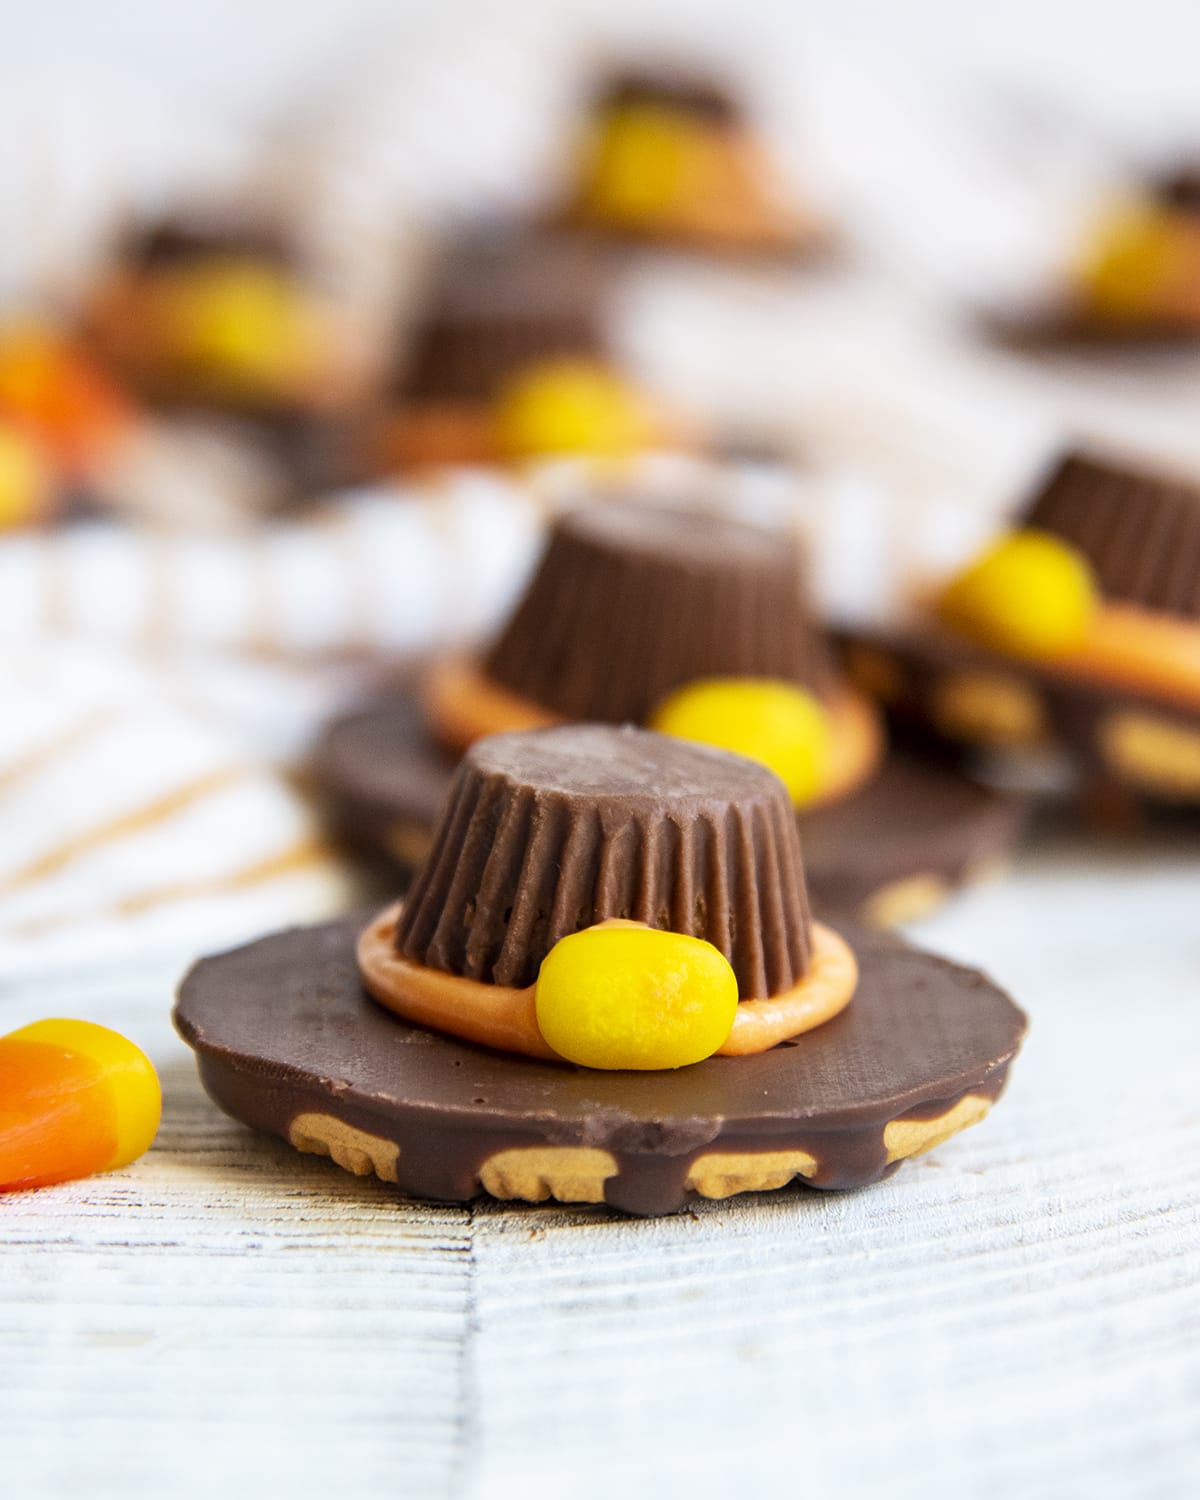 A Fudge Stripe cookie decorated to look like a Pilgrim Hat with a Peanut butter cup on top.